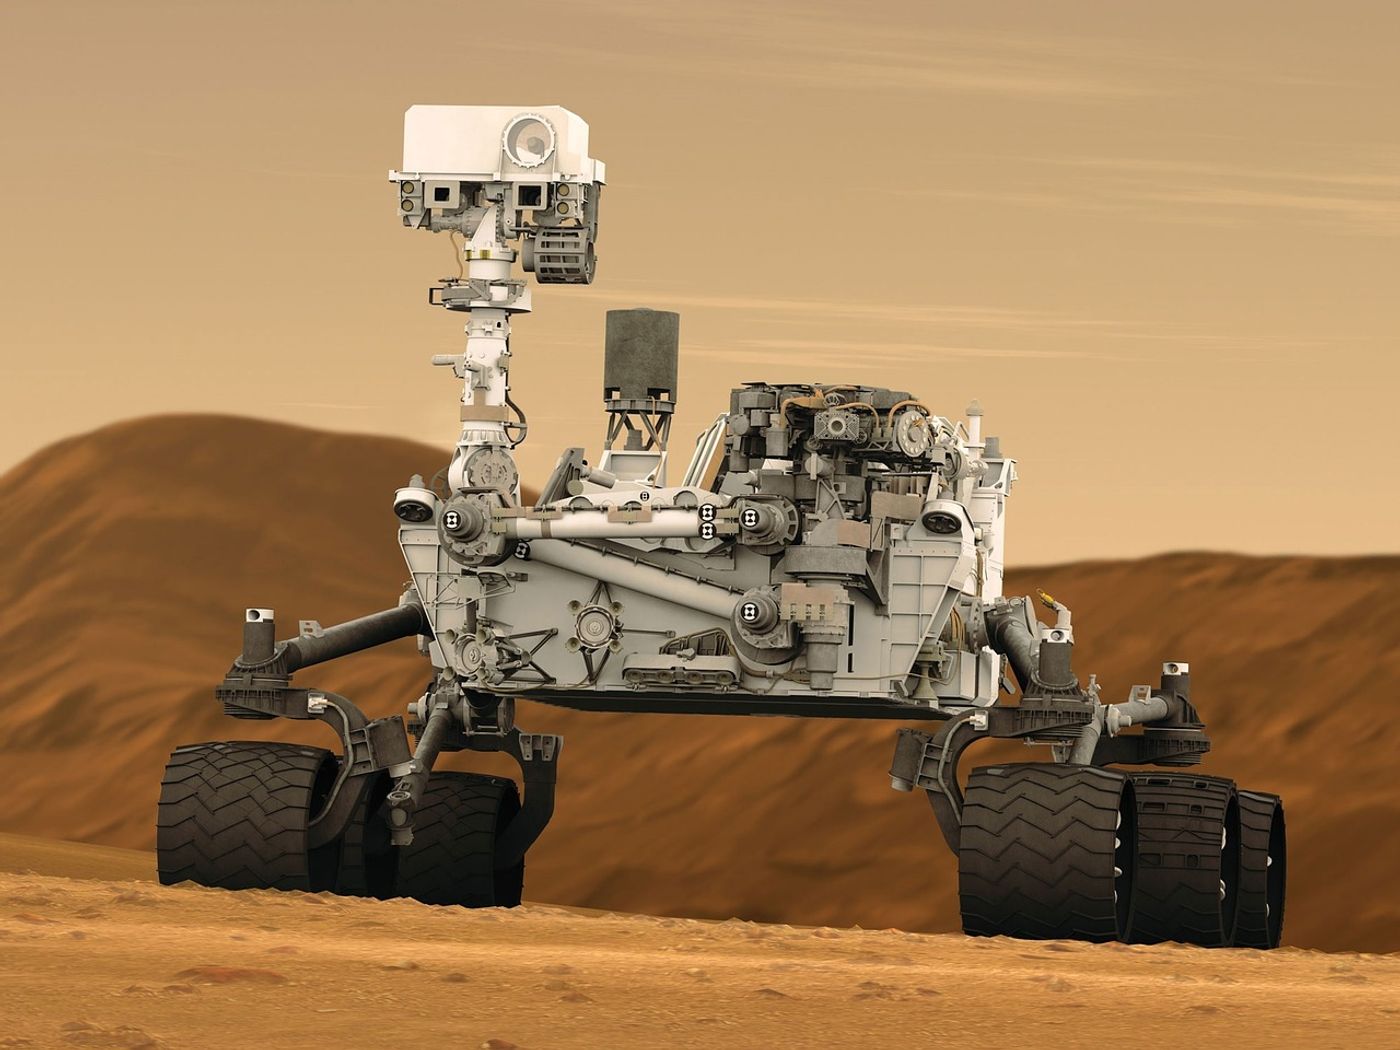 NASA's Curiosity rover is equipped to handle Mars exploration.